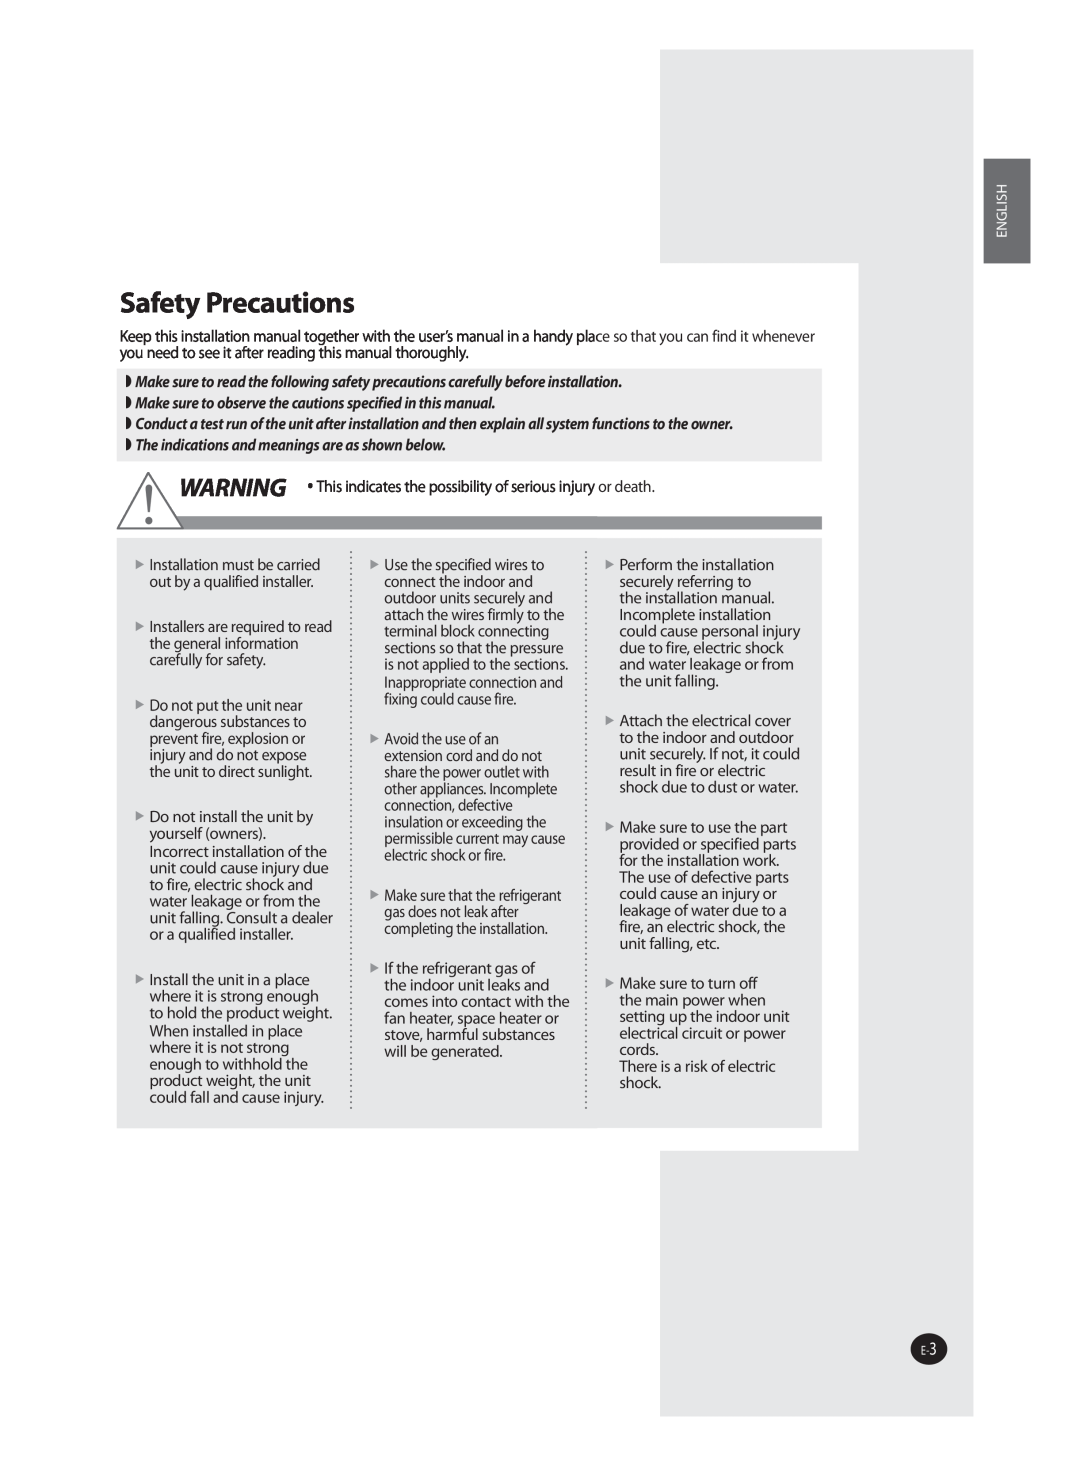 Samsung AQV09J installation manual The indications and meanings are as shown below, Safety Precautions 